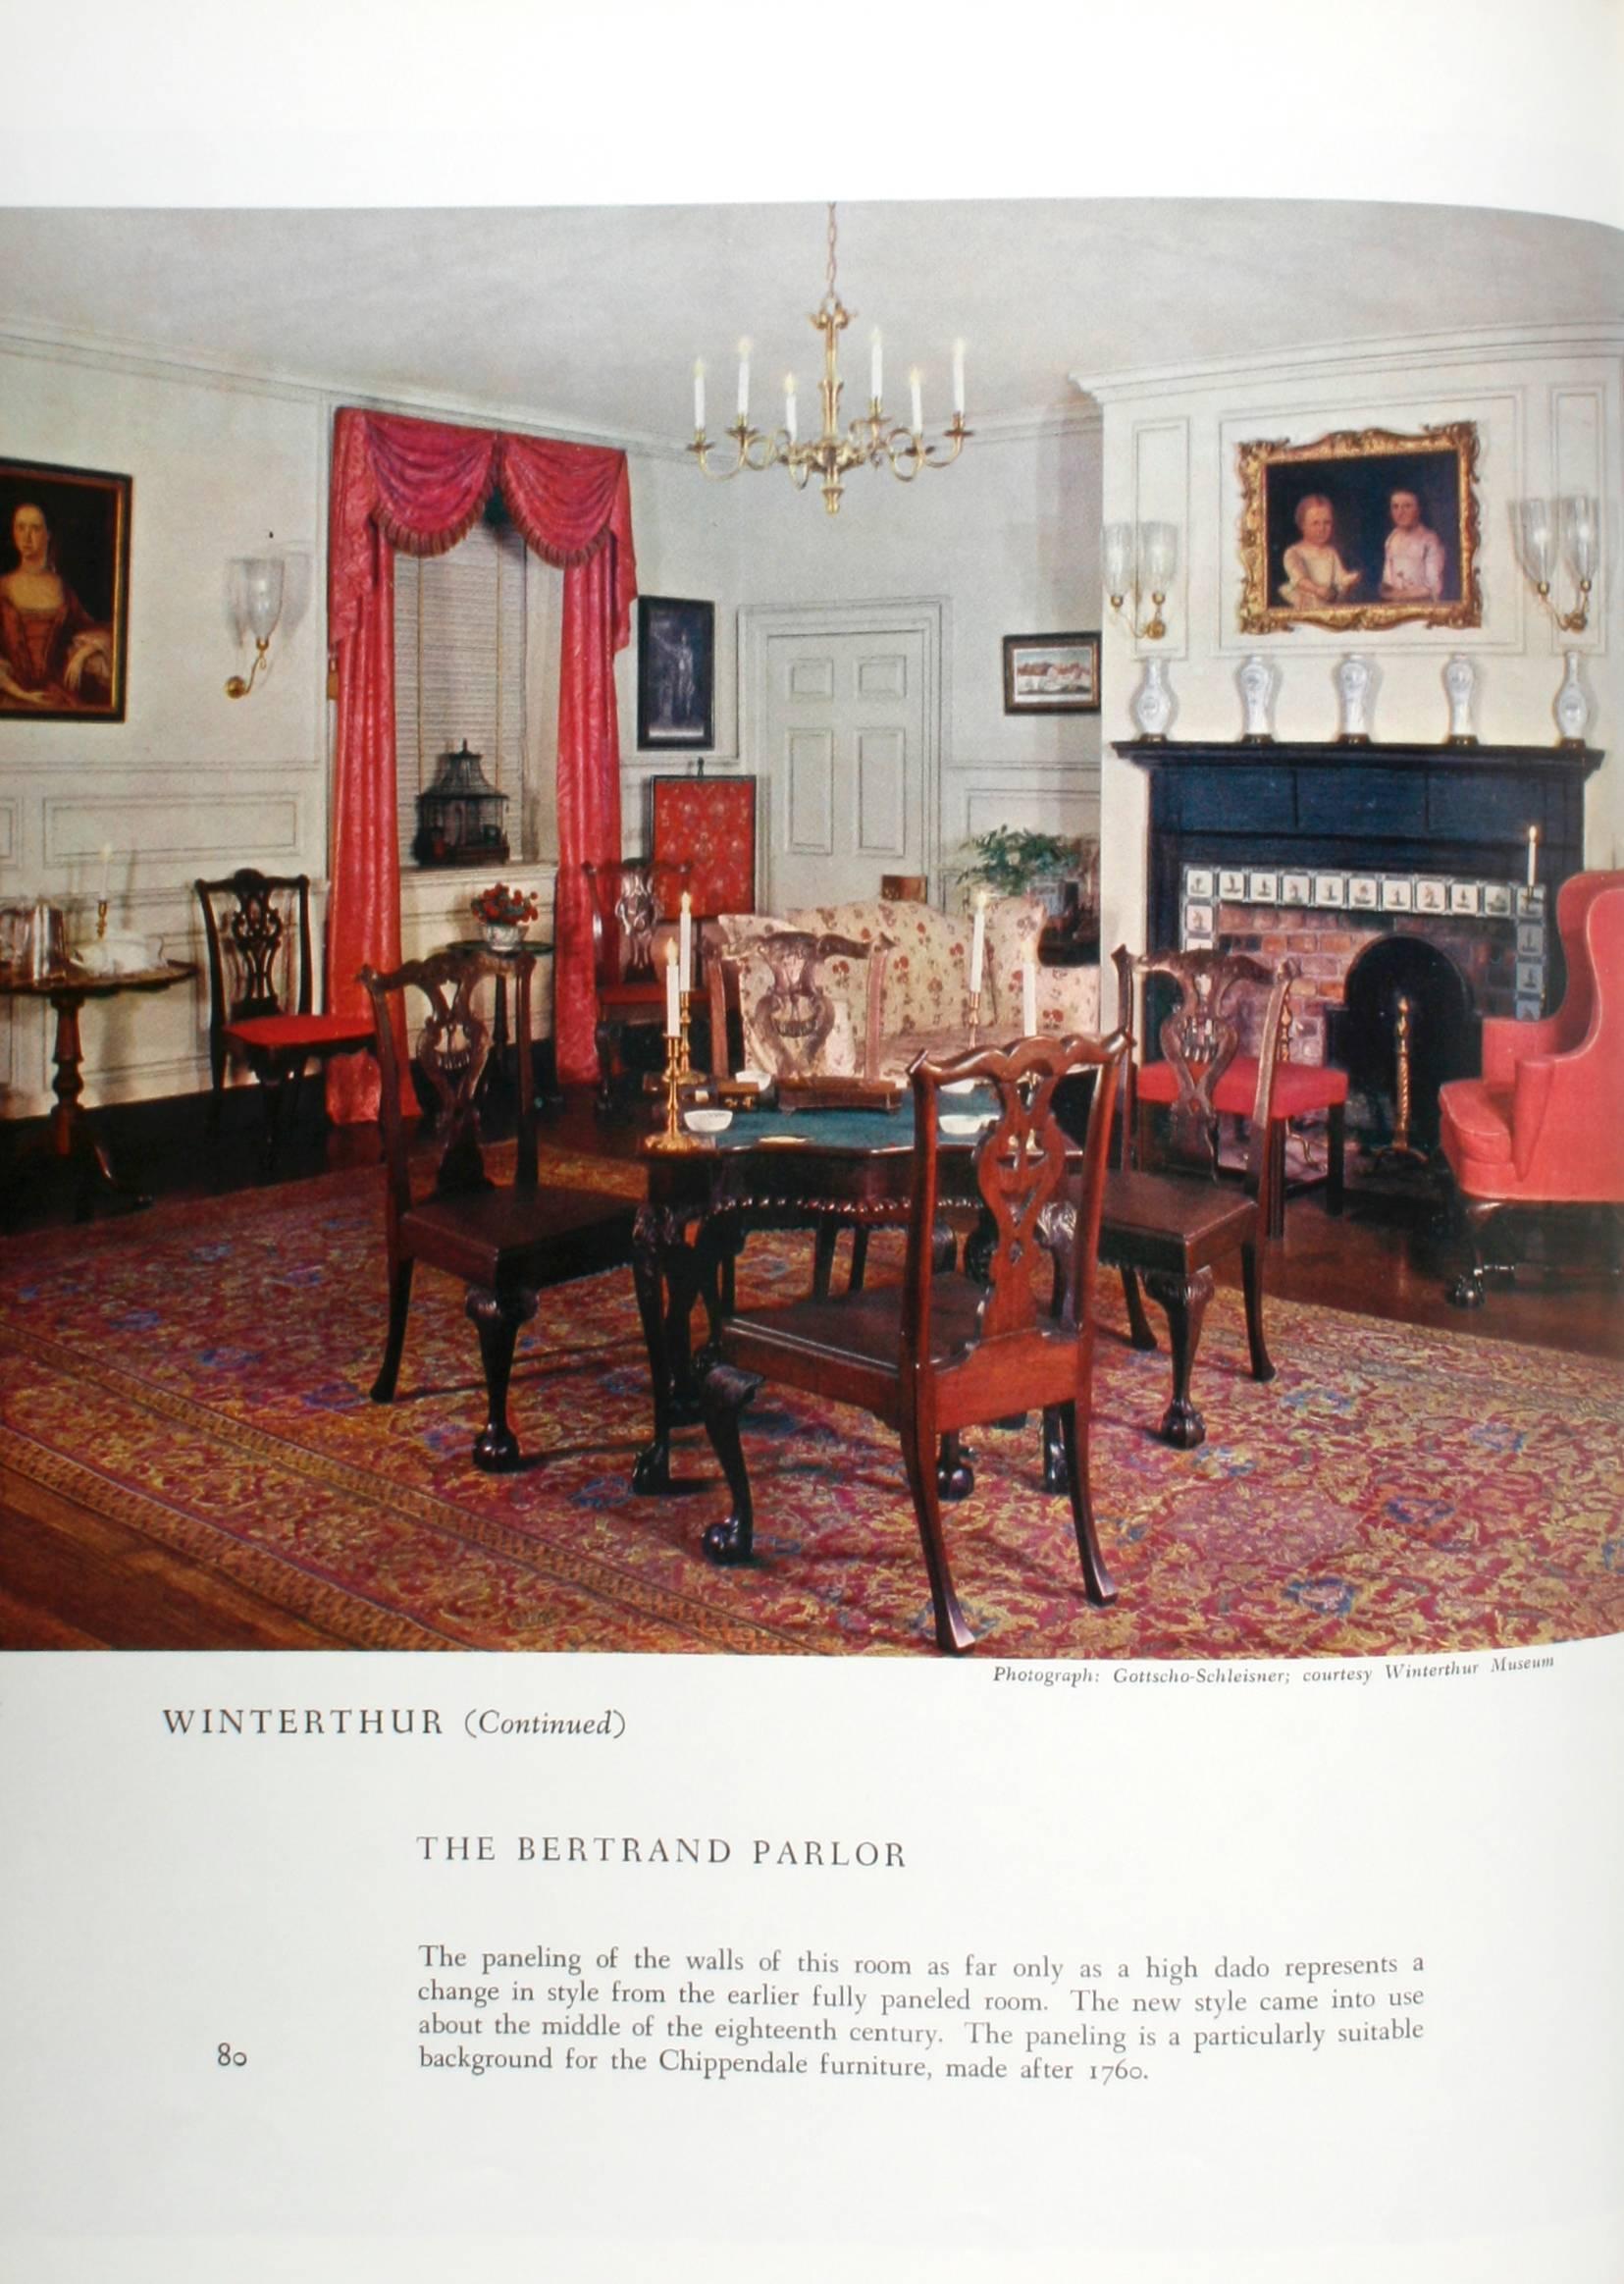 100 Most Beautiful Rooms in America by Helen Comstock. New York: Crown Publishers, Inc., 1965. Revised edition hardcover with dust jacket. 210 pp. A selection of 100 rooms chosen as the best in authentic traditional American home decoration. The